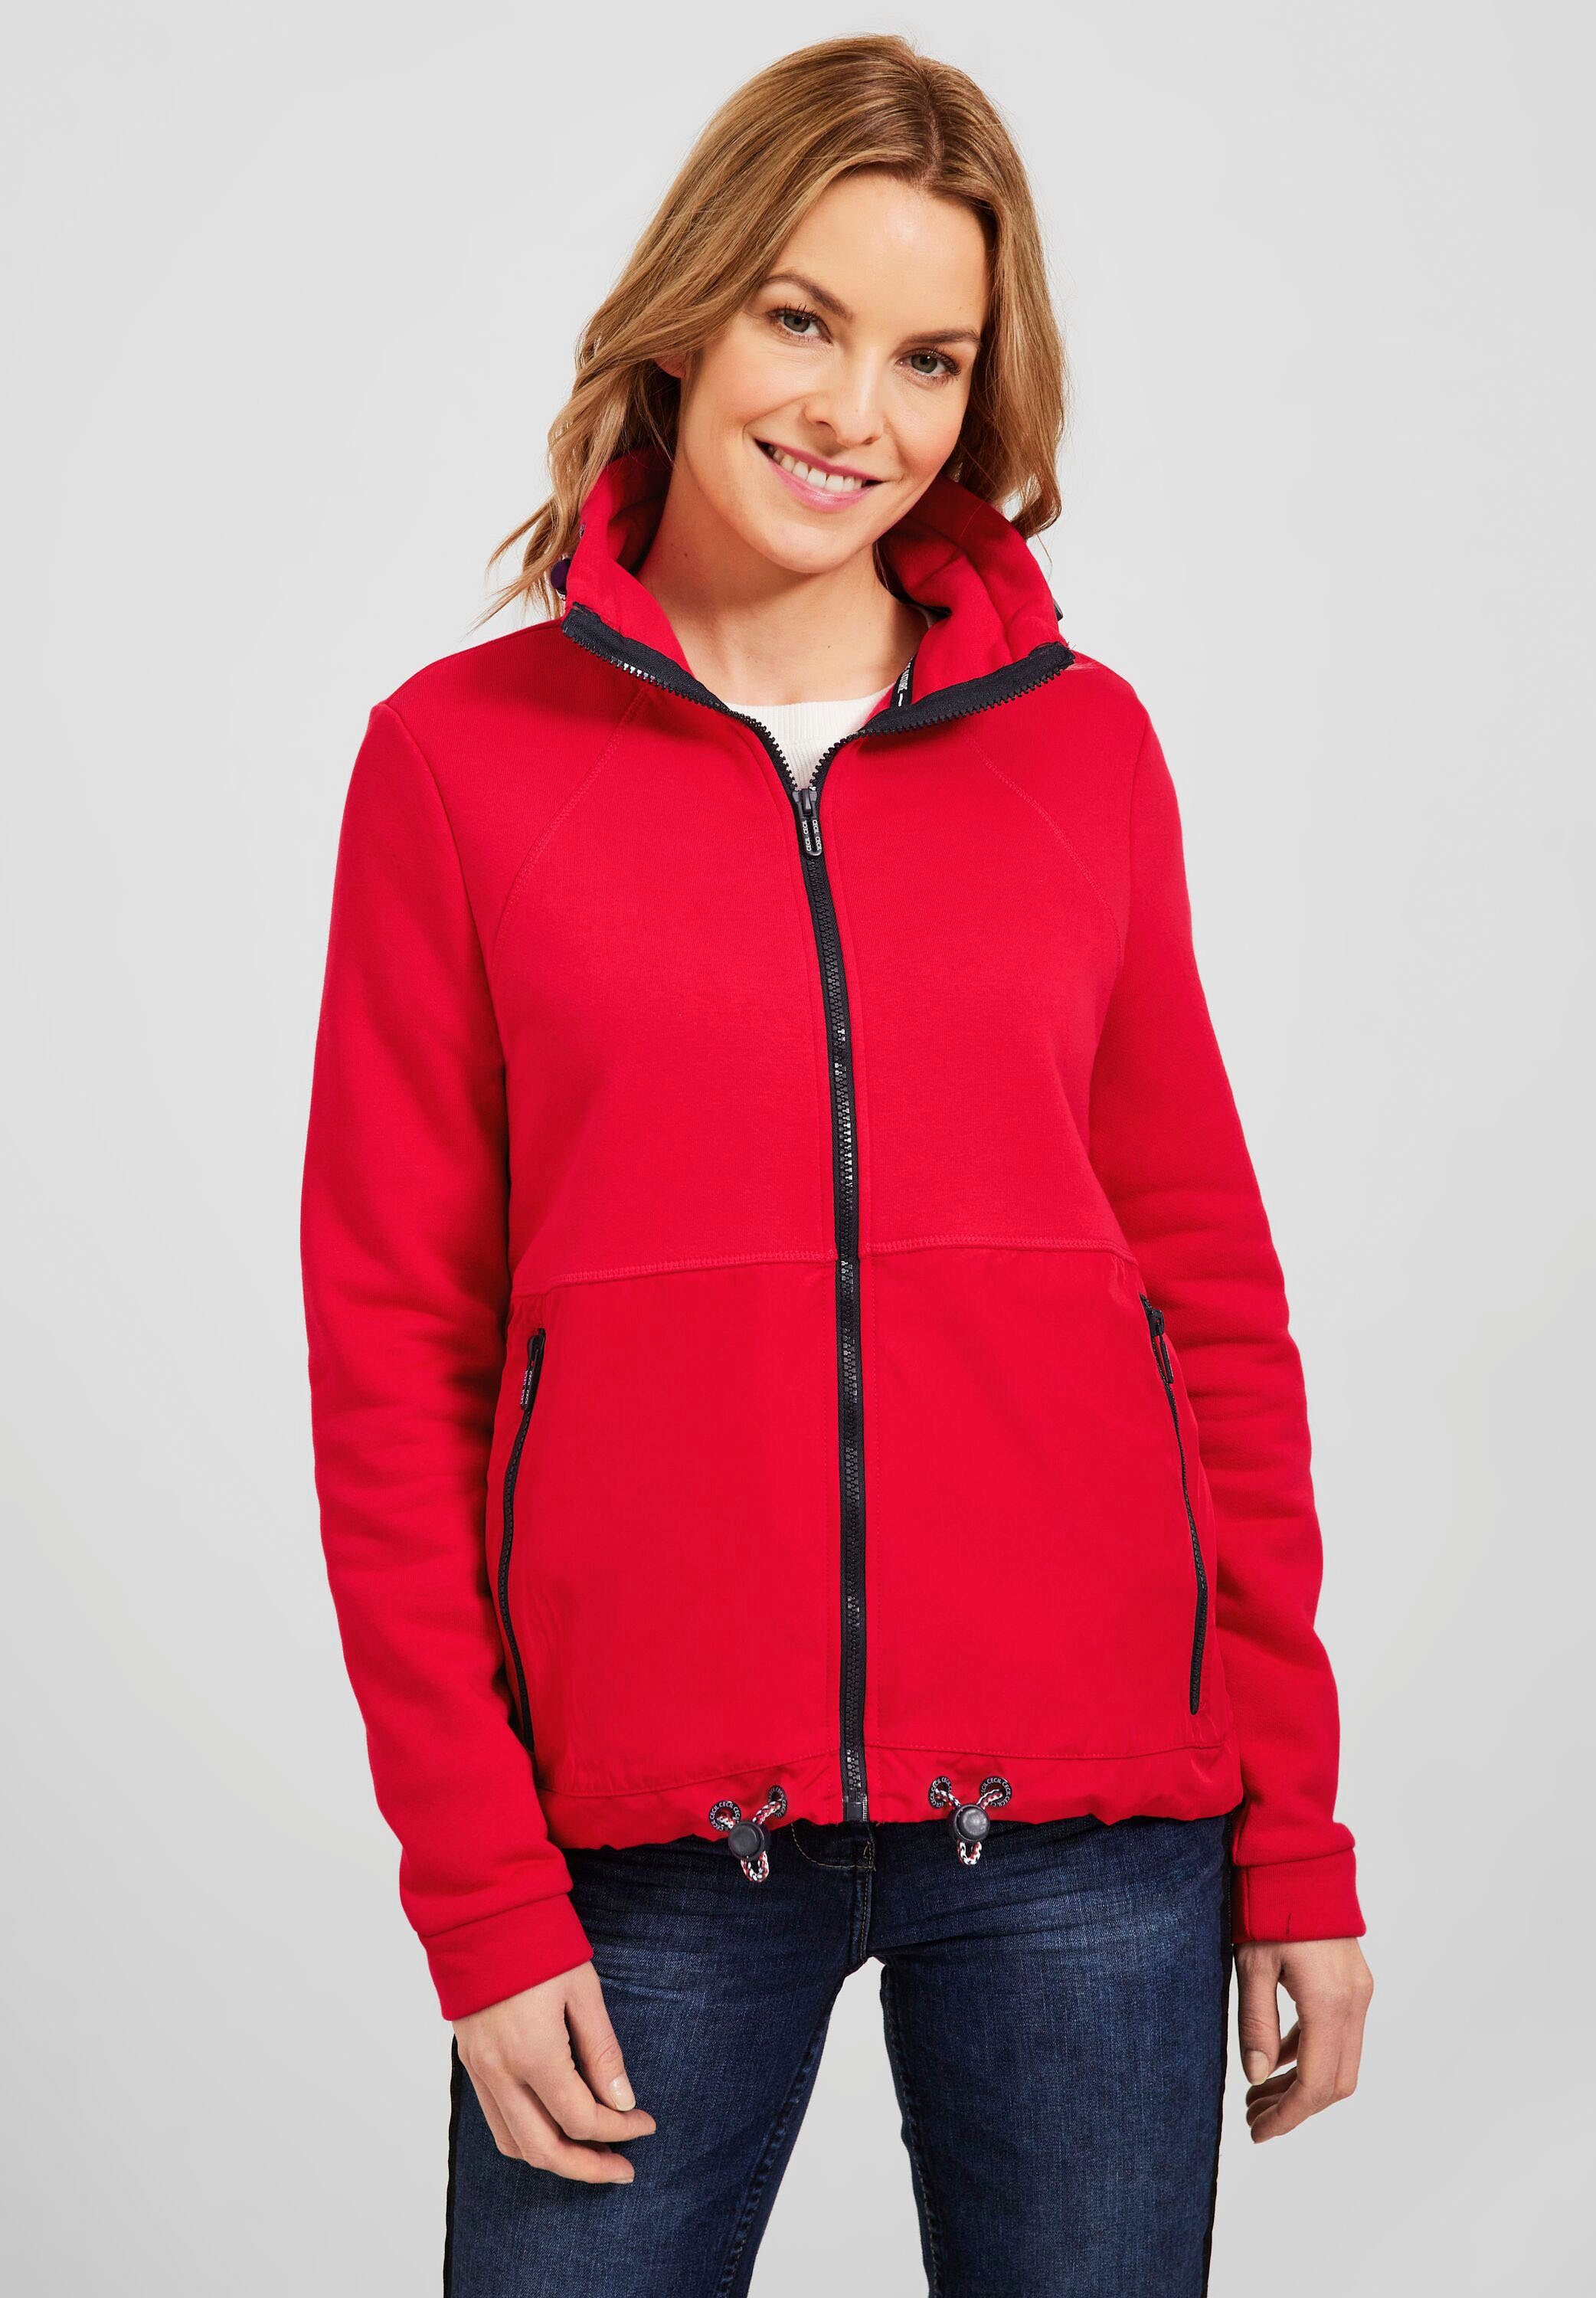 Sweatjacke strong Materialmix Cecil red im modernen